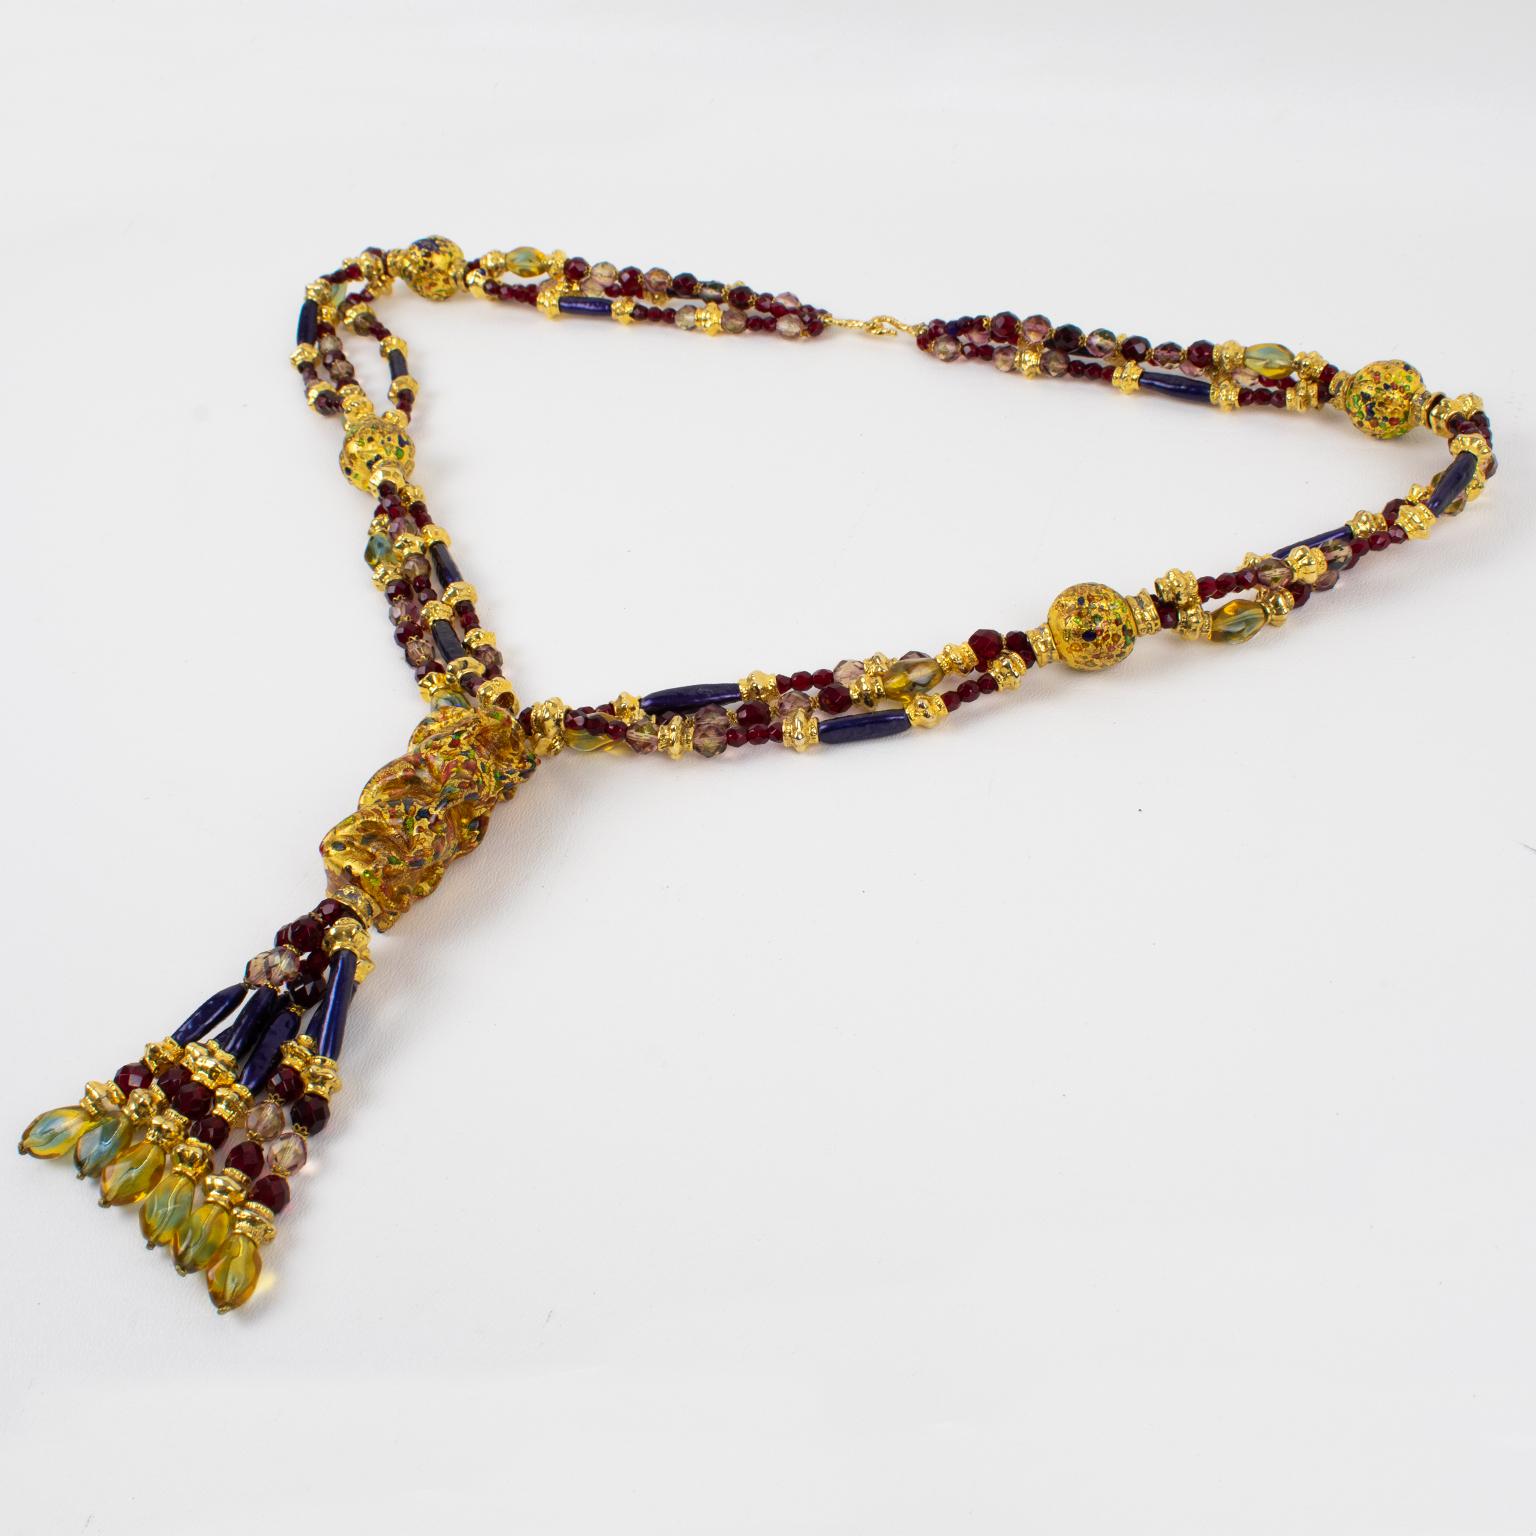 Christian Dior 1980s Runway Murano Art Glass Extra-Long Necklace In Excellent Condition For Sale In Atlanta, GA